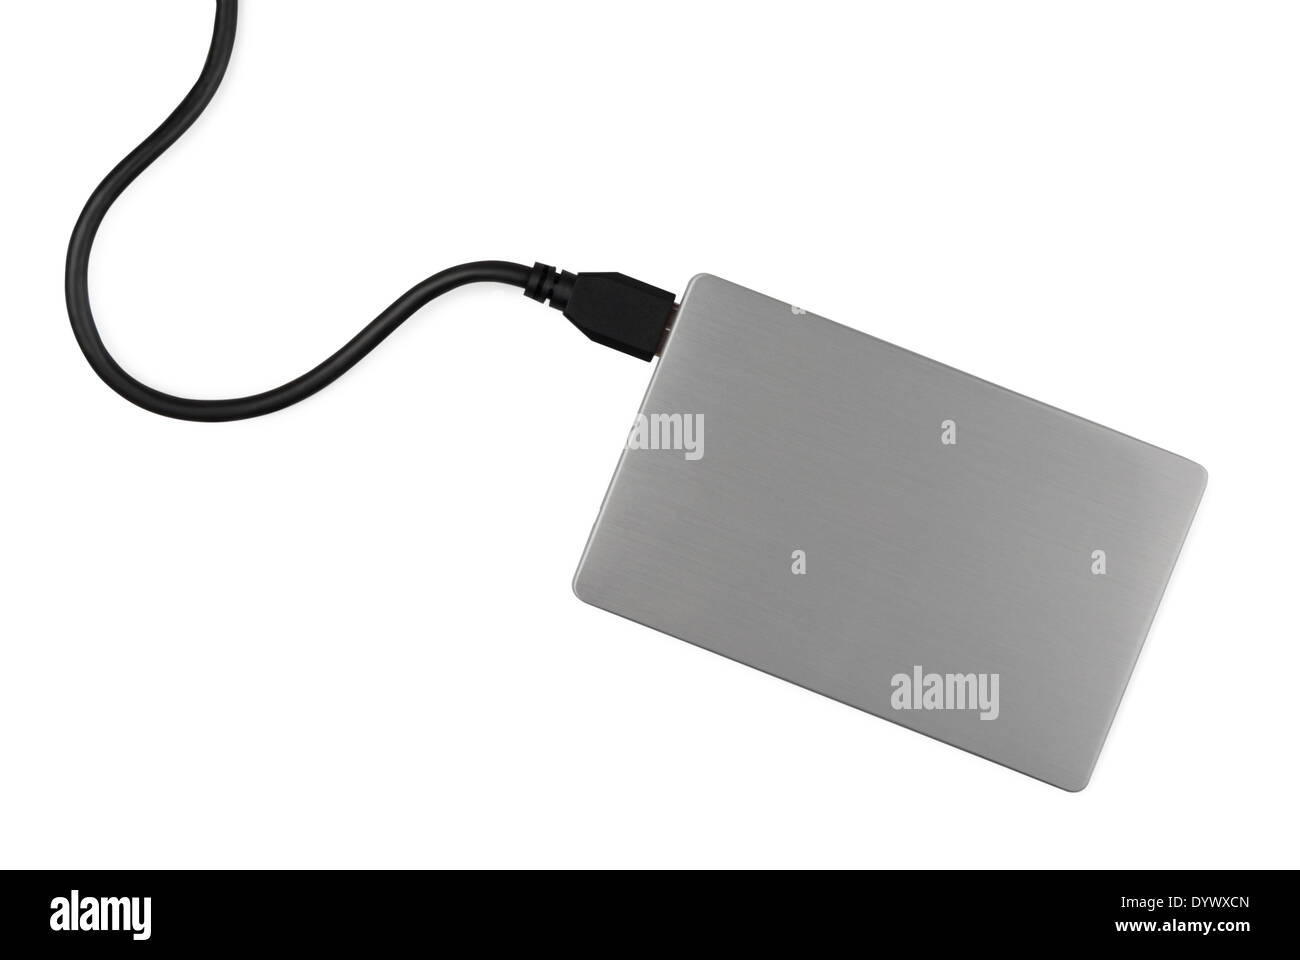 Universal card reader with wire on a white background Stock Photo